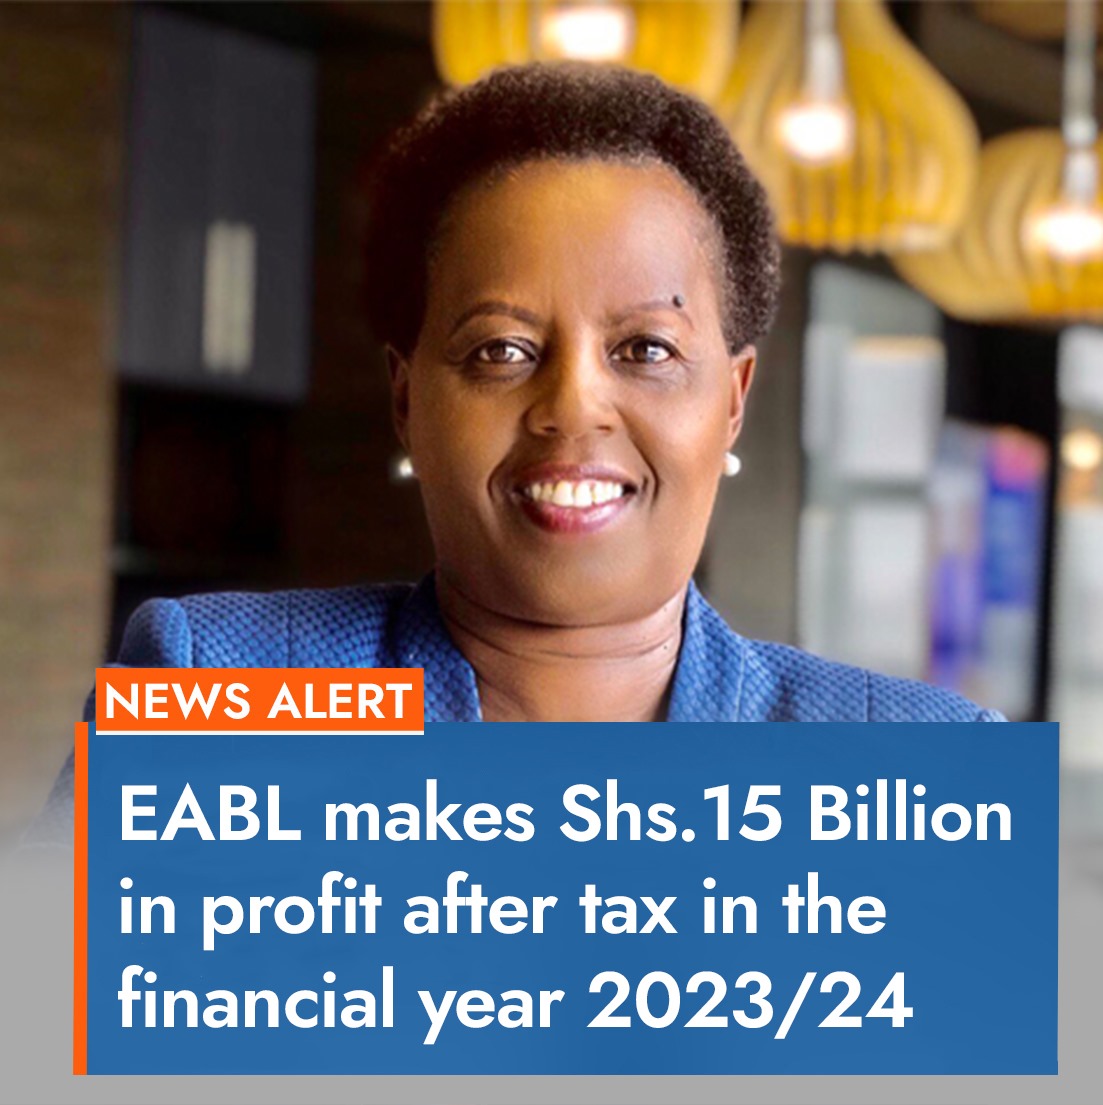 EABL made Kshs 15 B in profit after tax in the Financial year 2023/2024. #MarketConfidence Kenyans SPENDING PESA iko